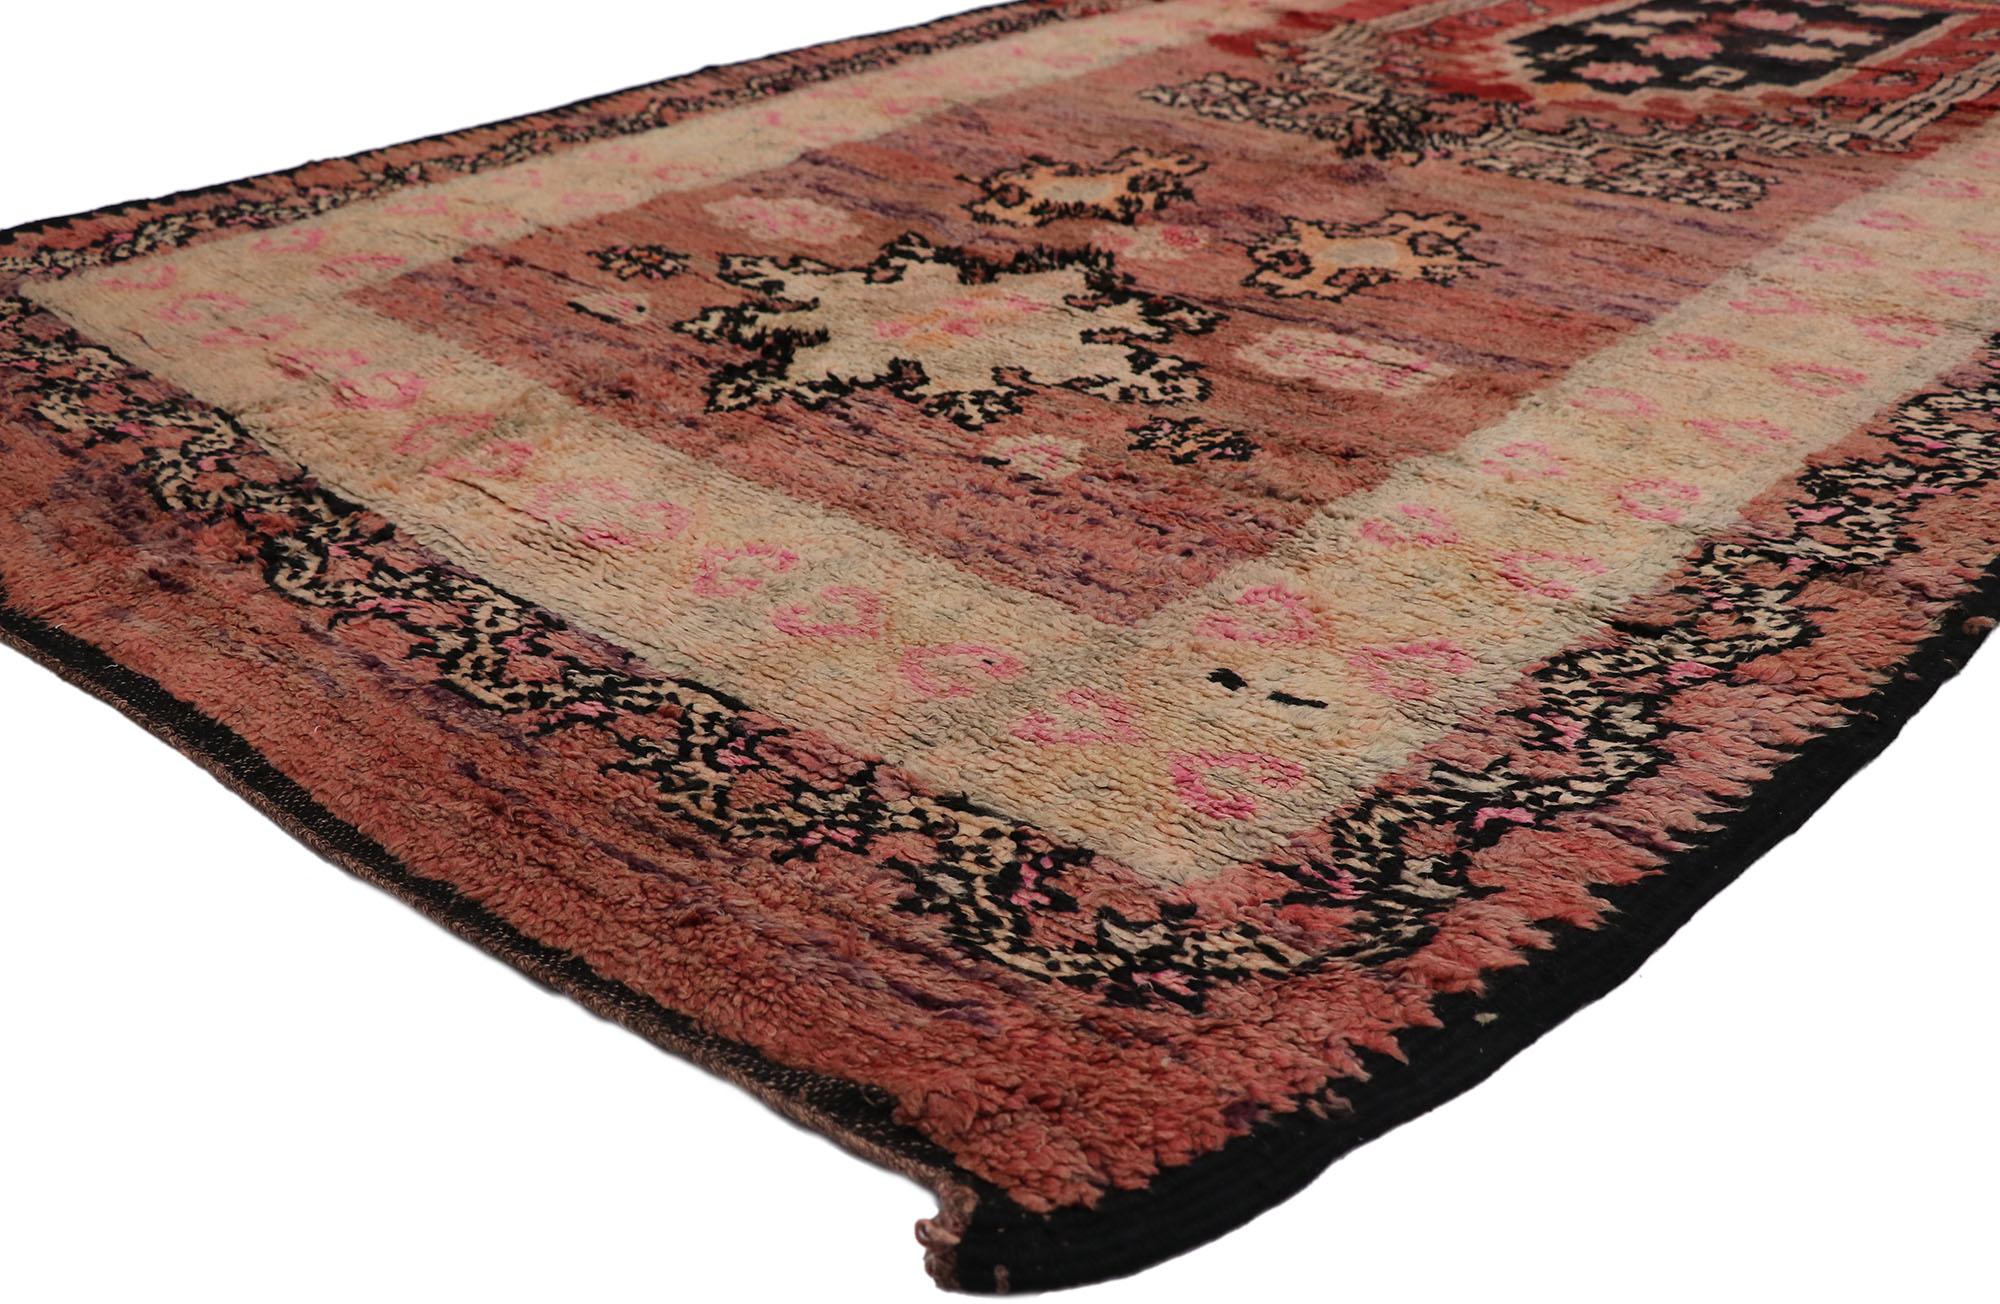 21528 Vintage Berber Moroccan Rug with Tribal Style 05'10 x 08'08. Showcasing a directional layout, incredible detail and texture, this hand knotted wool vintage Berber Moroccan rug is a captivating vision of woven beauty. The abrashed purple and